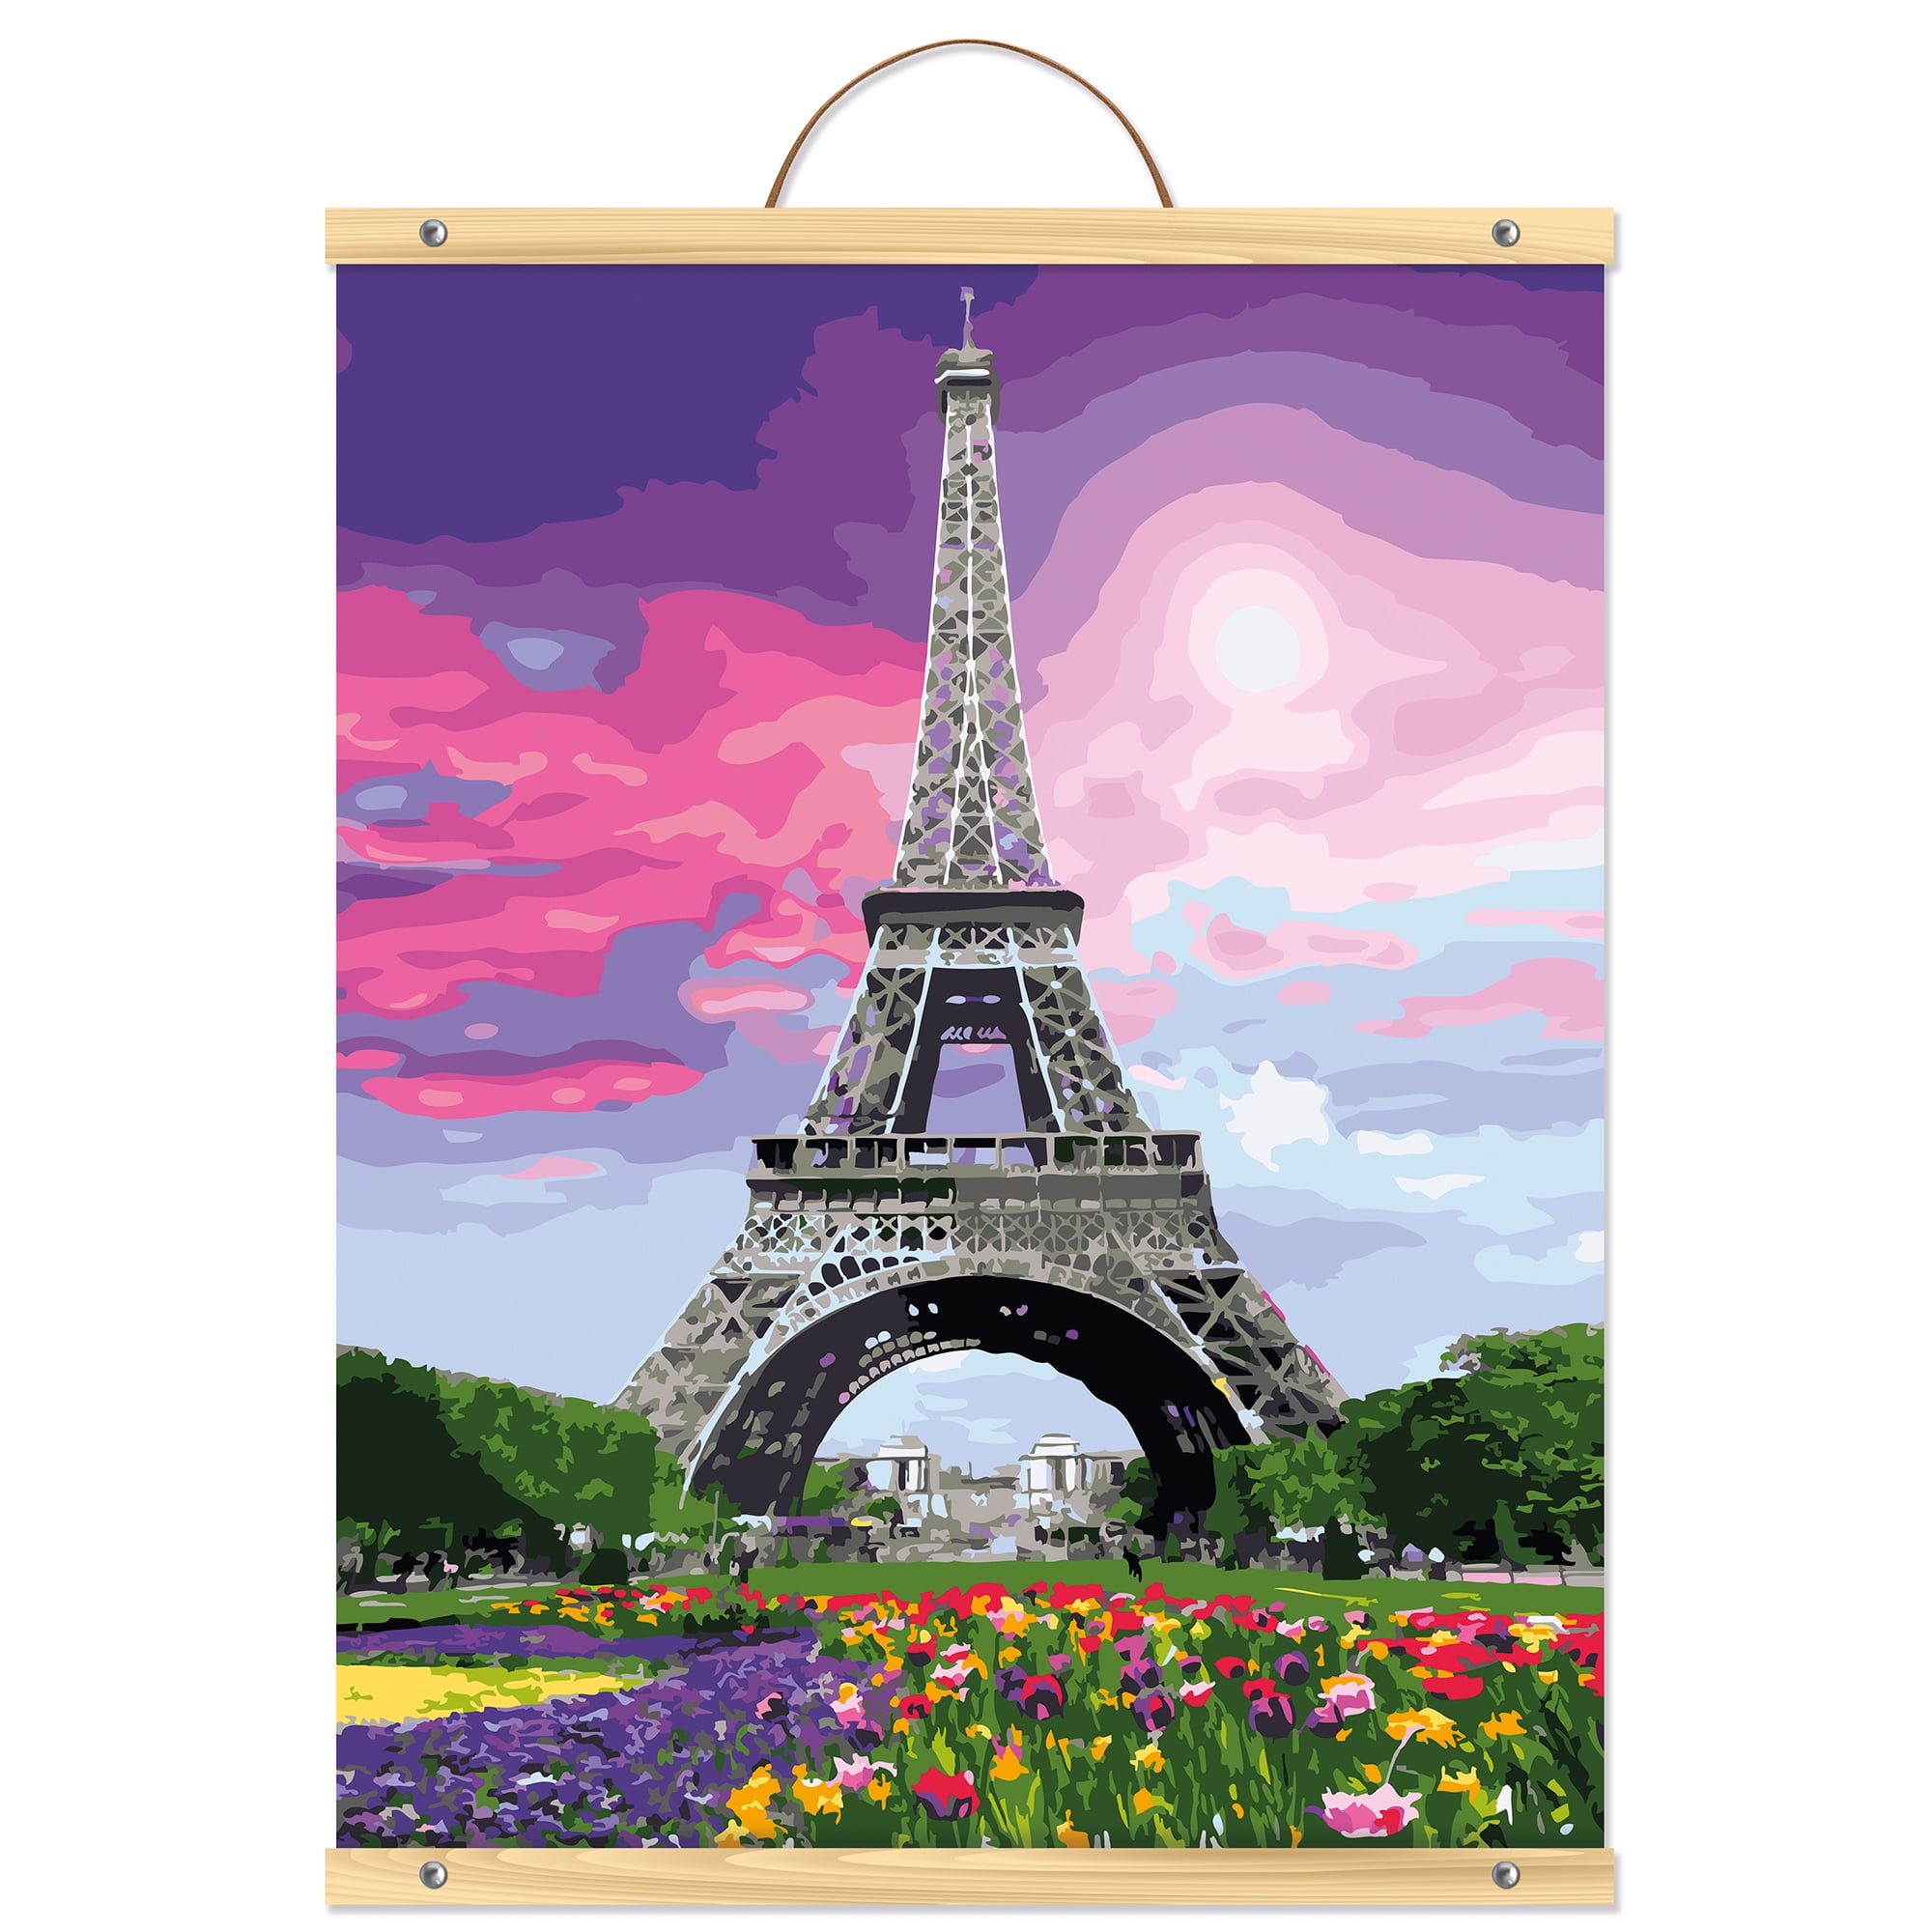 Romantic Paris - Paint by Numbers Kit for Adults DIY Oil Painting Kit on  Canvas